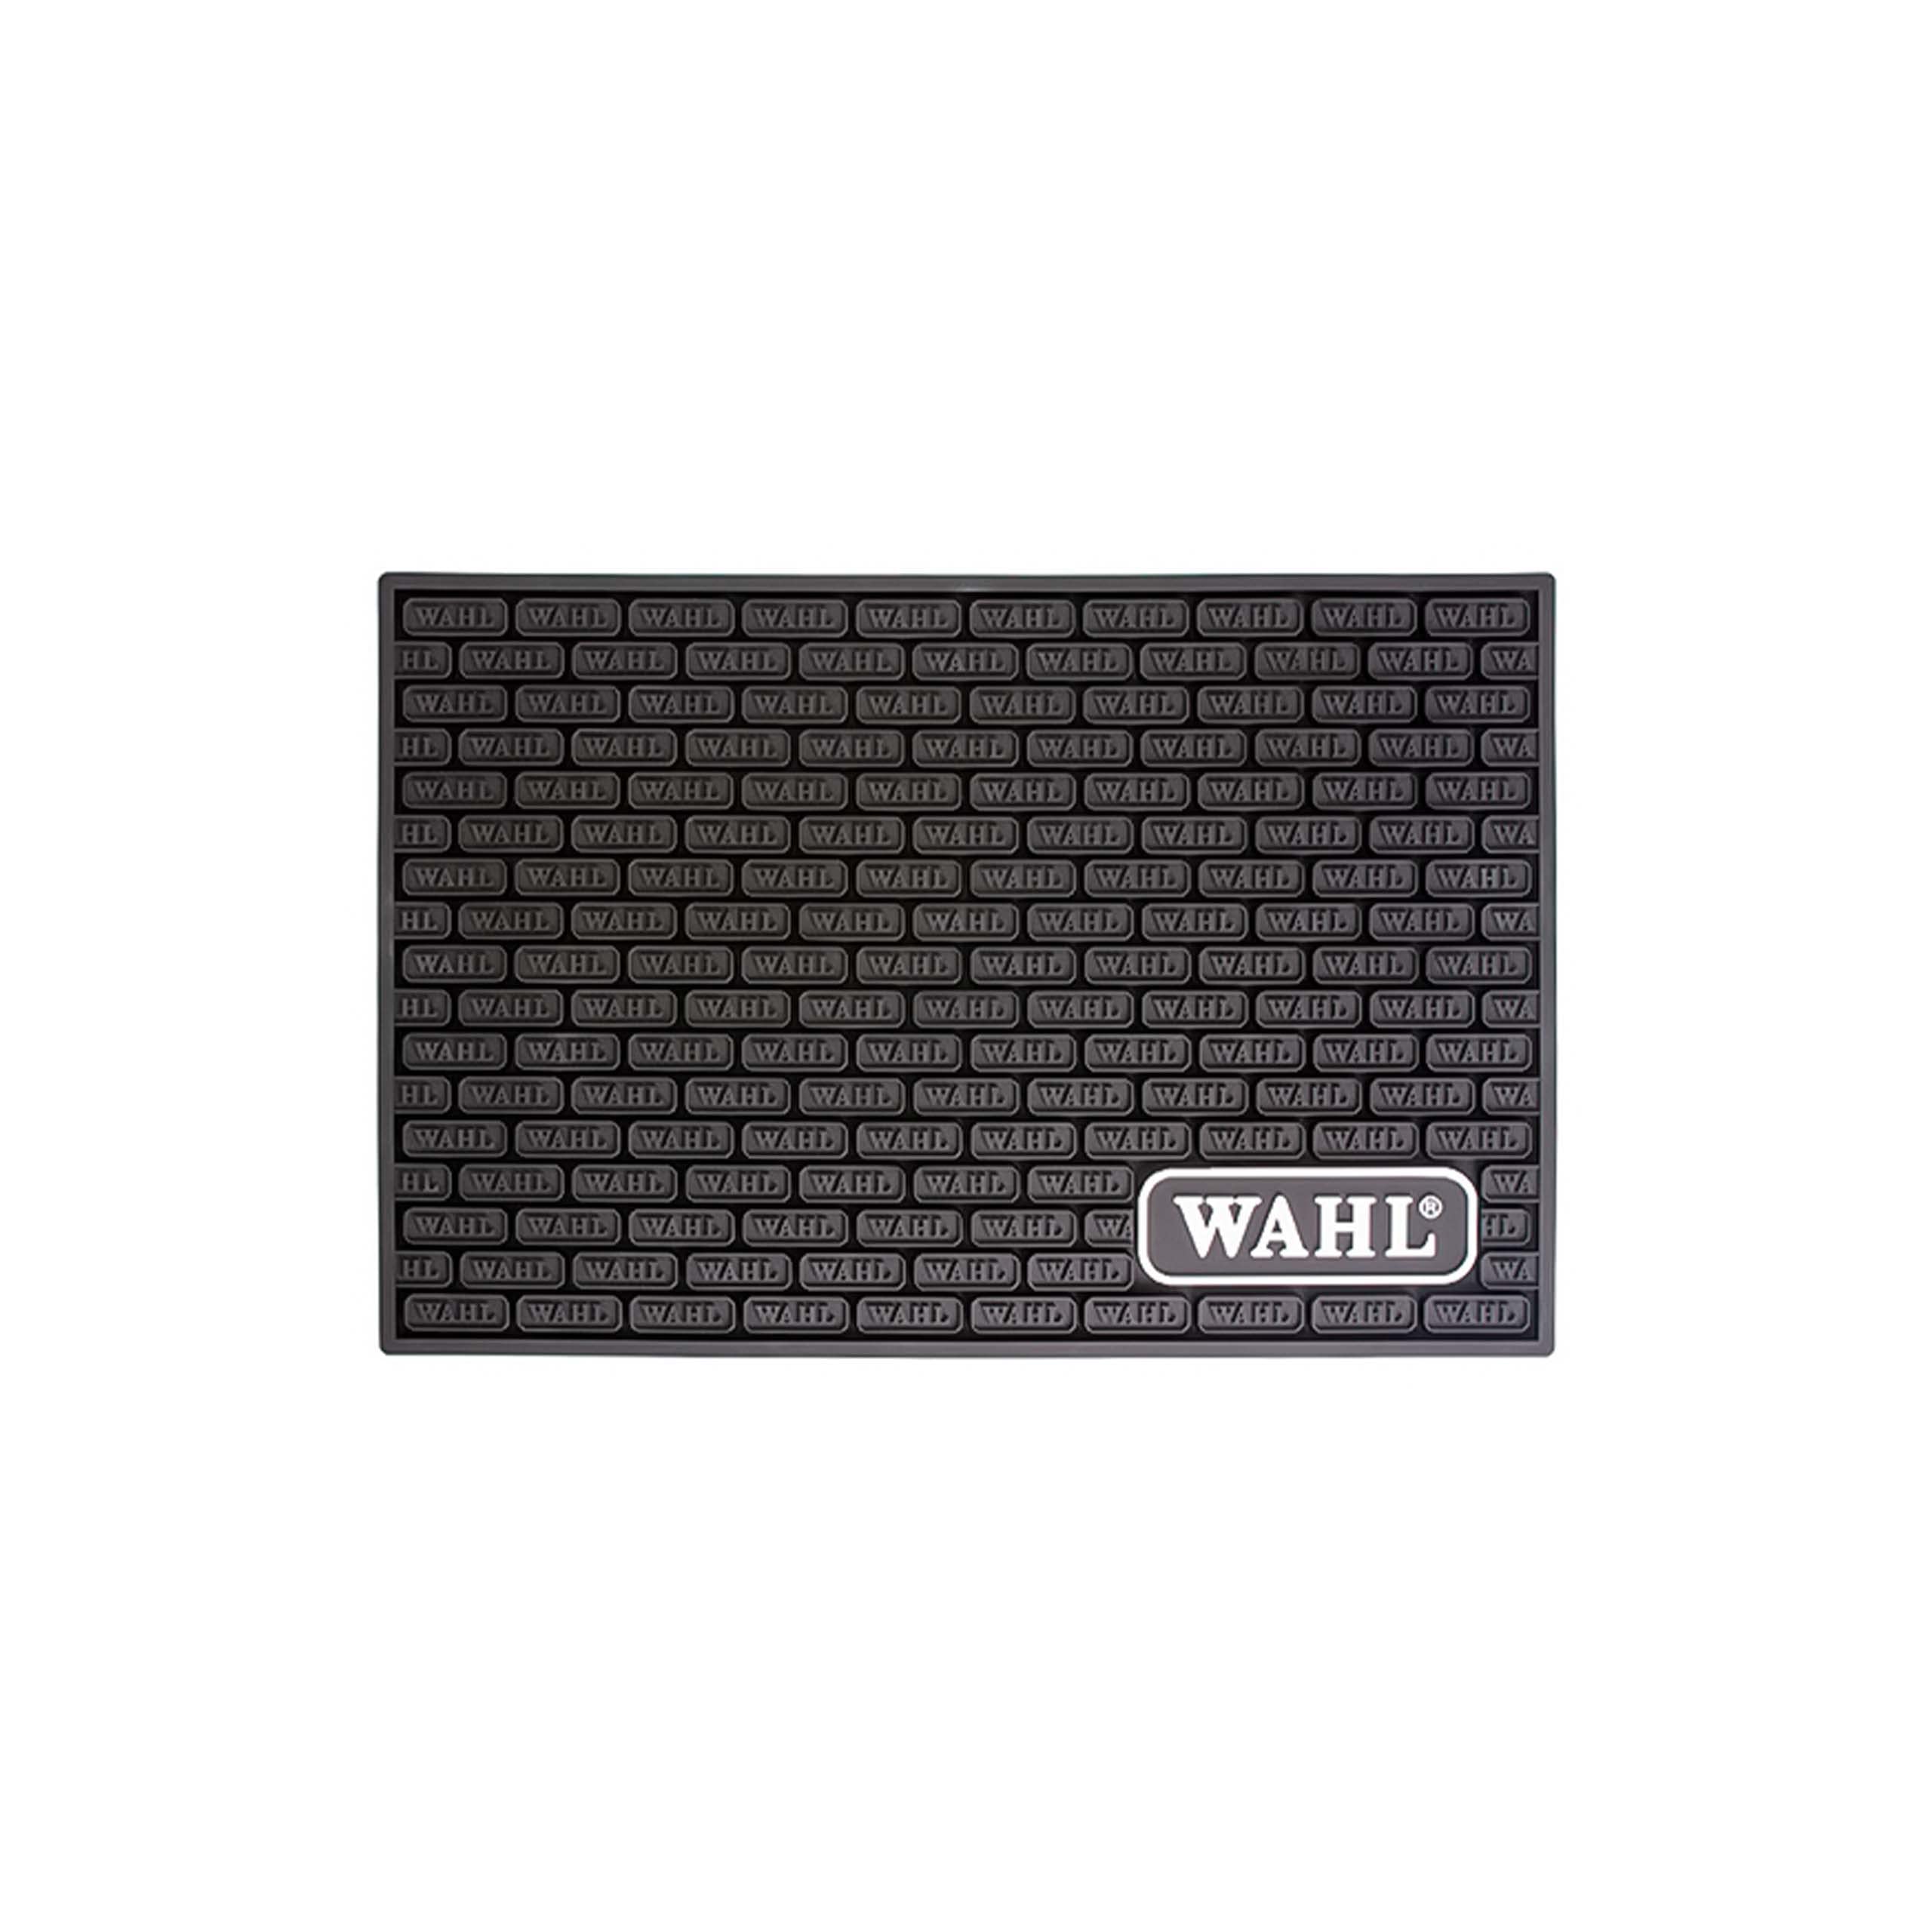 Wahl Professional Super Taper Hair Clipper Tool Mat for Clippers, Trimmers & Haircut Tools Bundle